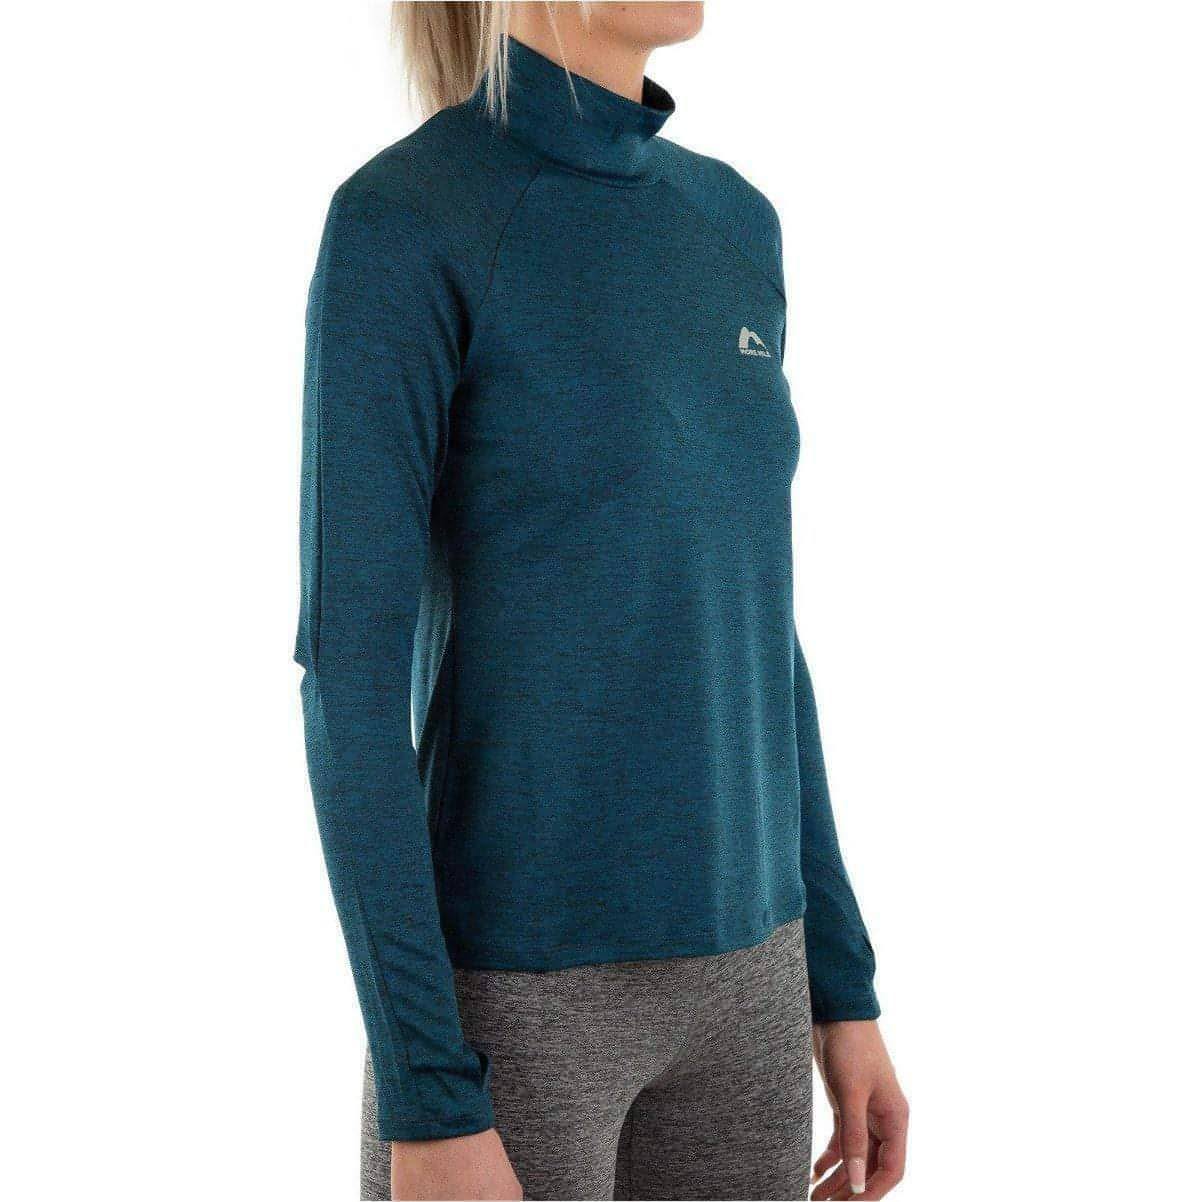 More Mile Train To Run Womens Long Sleeve Funnel Neck Running Top - Blue - Start Fitness